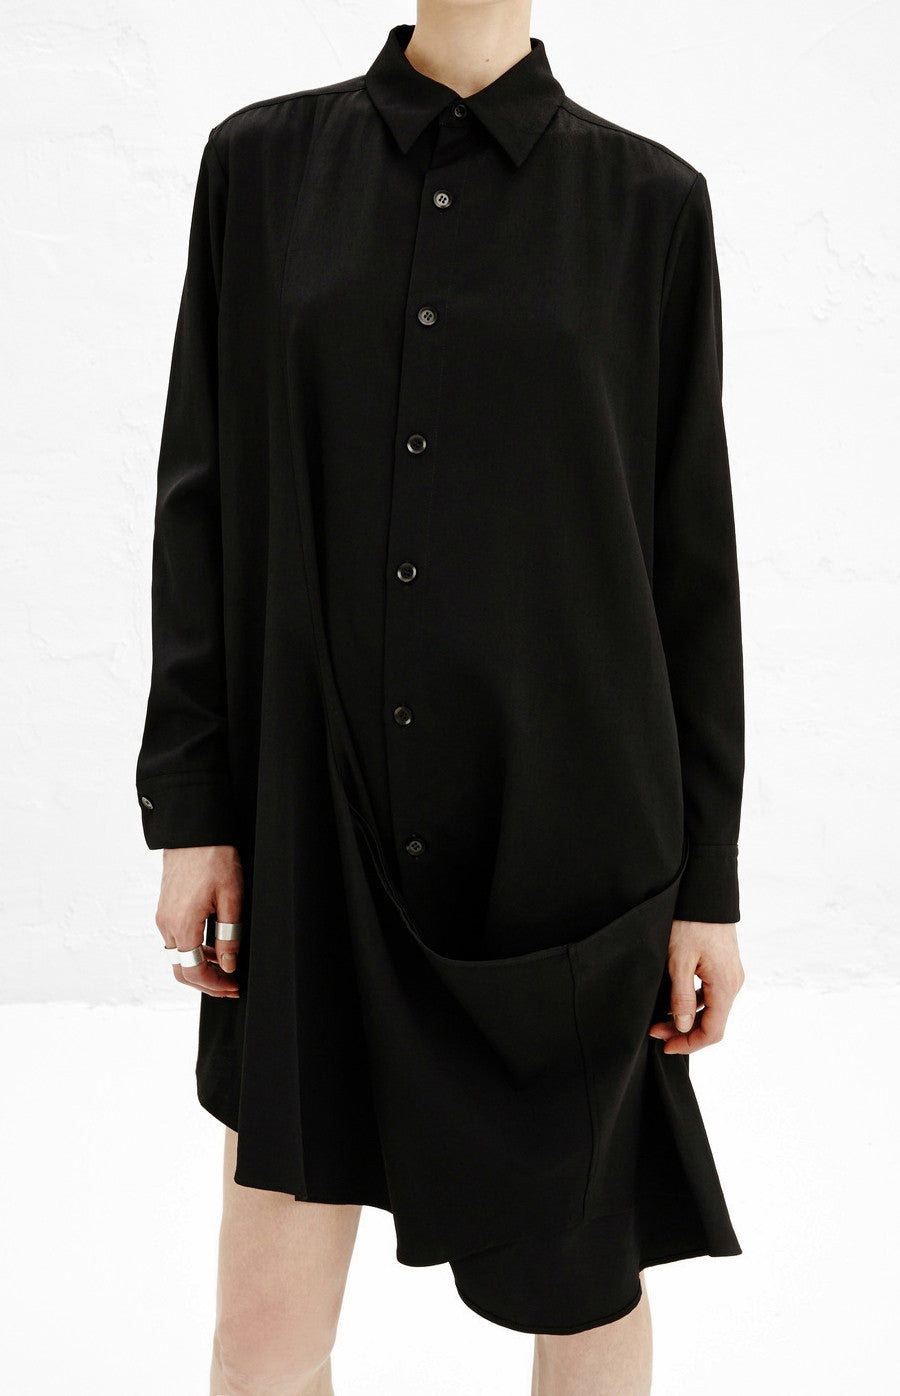 Crossover Buttoned Dress // Loose Fit Cape-Style Blouse Shirt